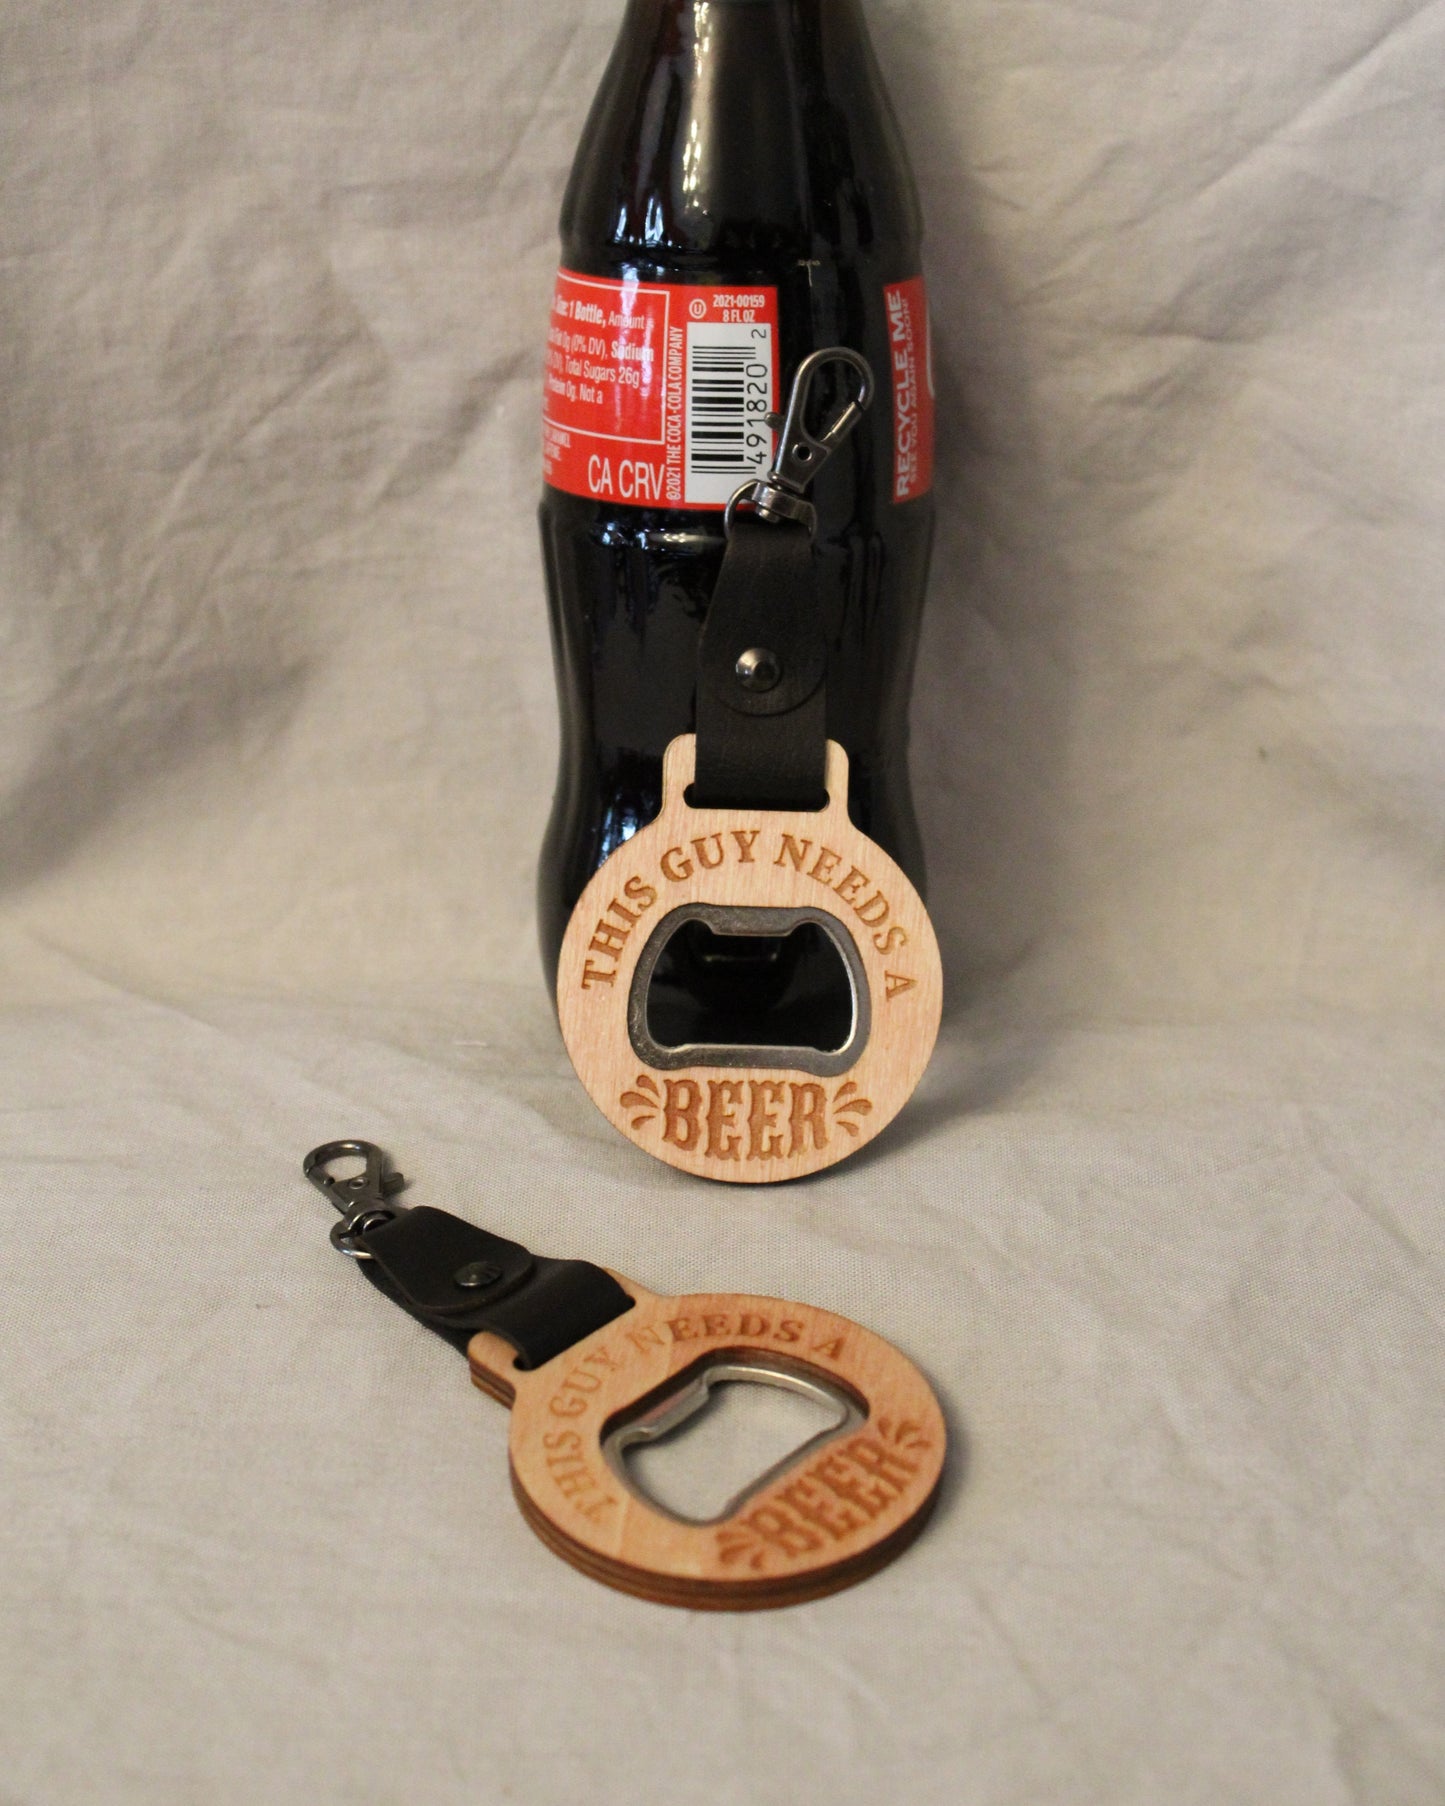 This Guy Needs a Beer Keychain Bottle Opener